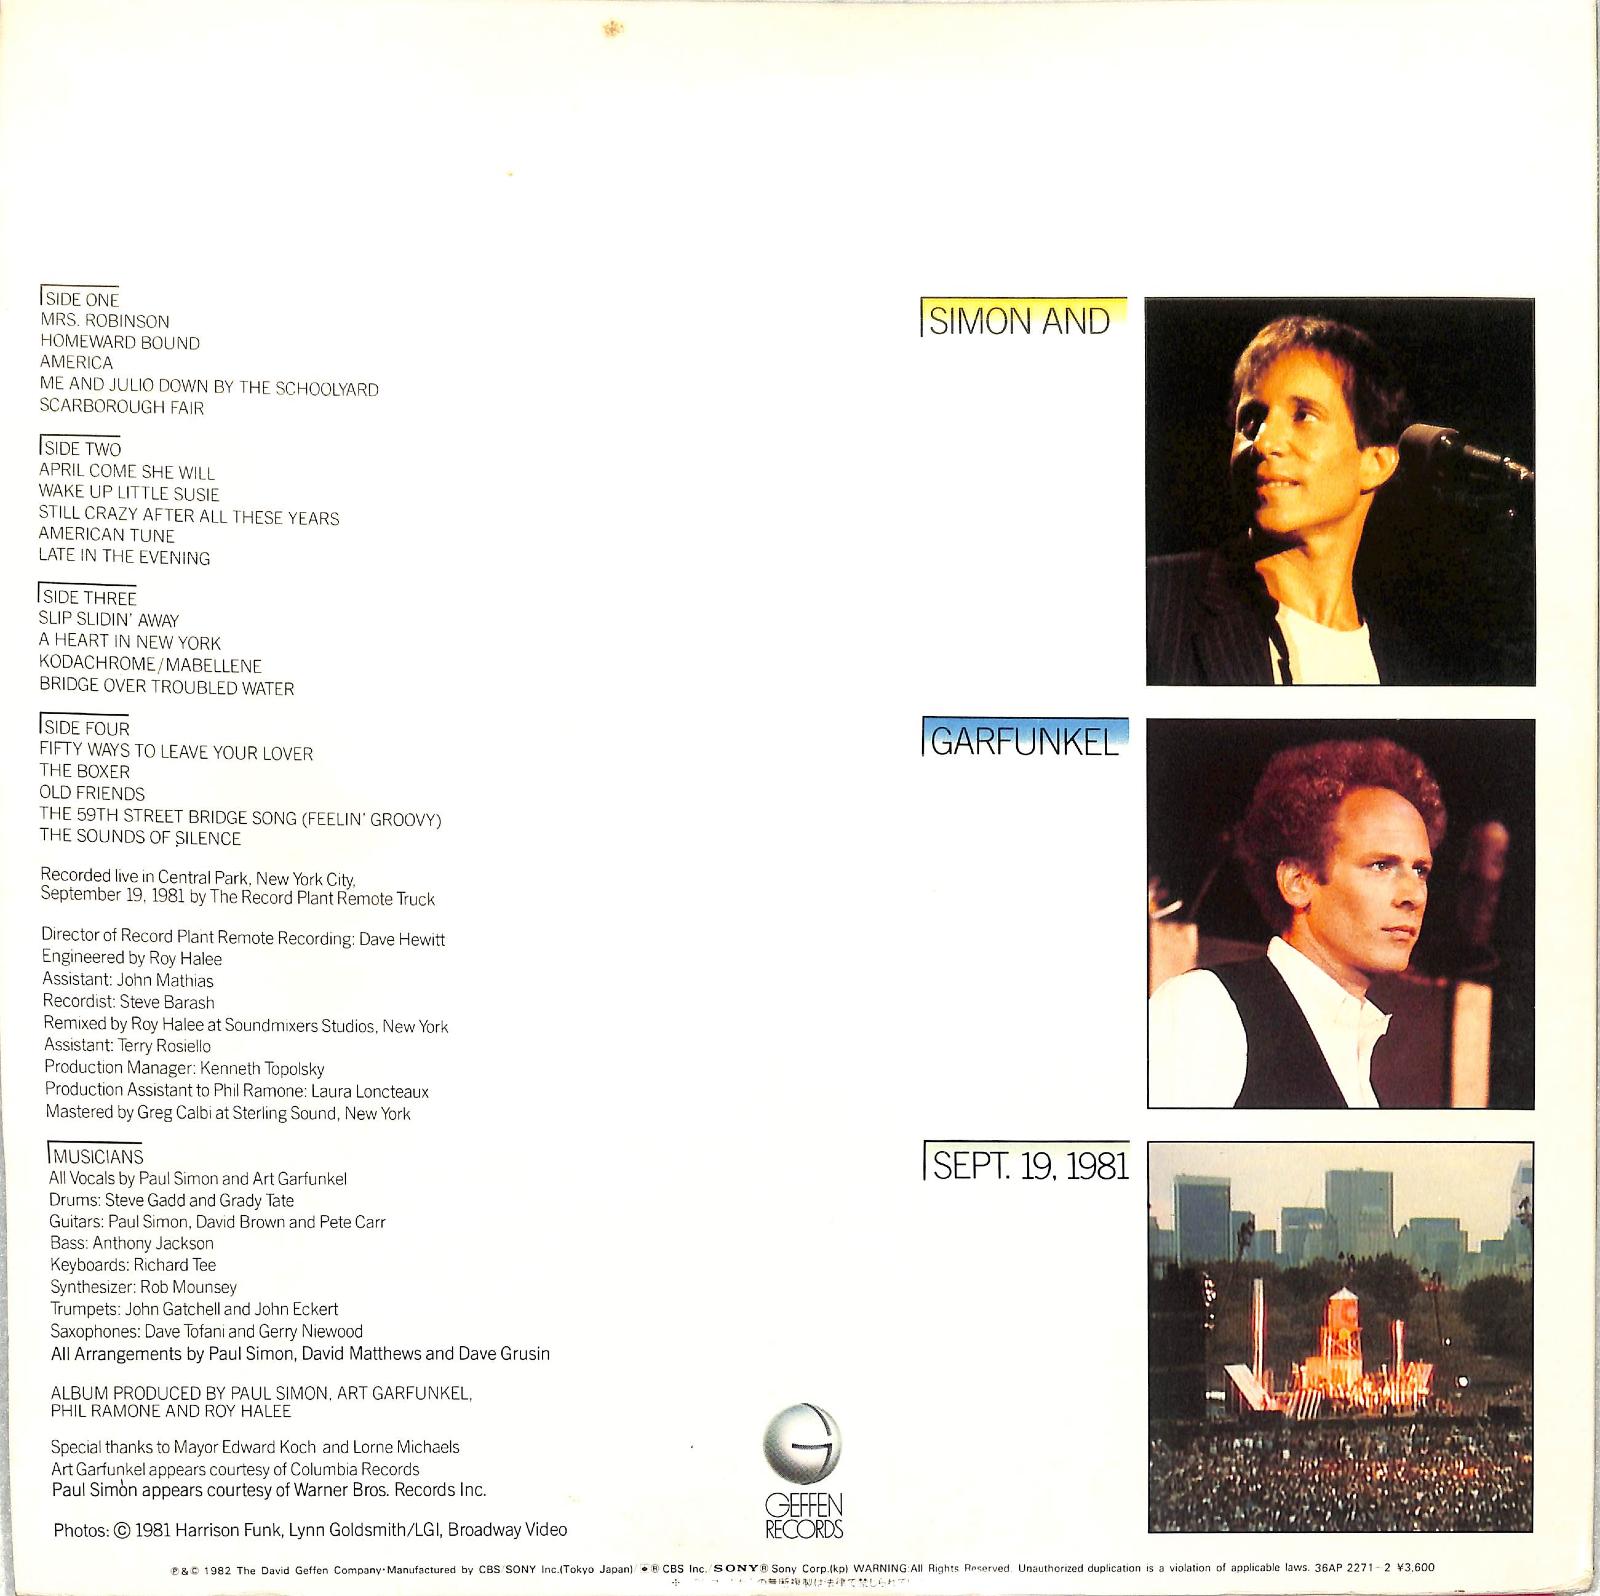 SIMON AND GARFUNKEL - The Concert In Central Park